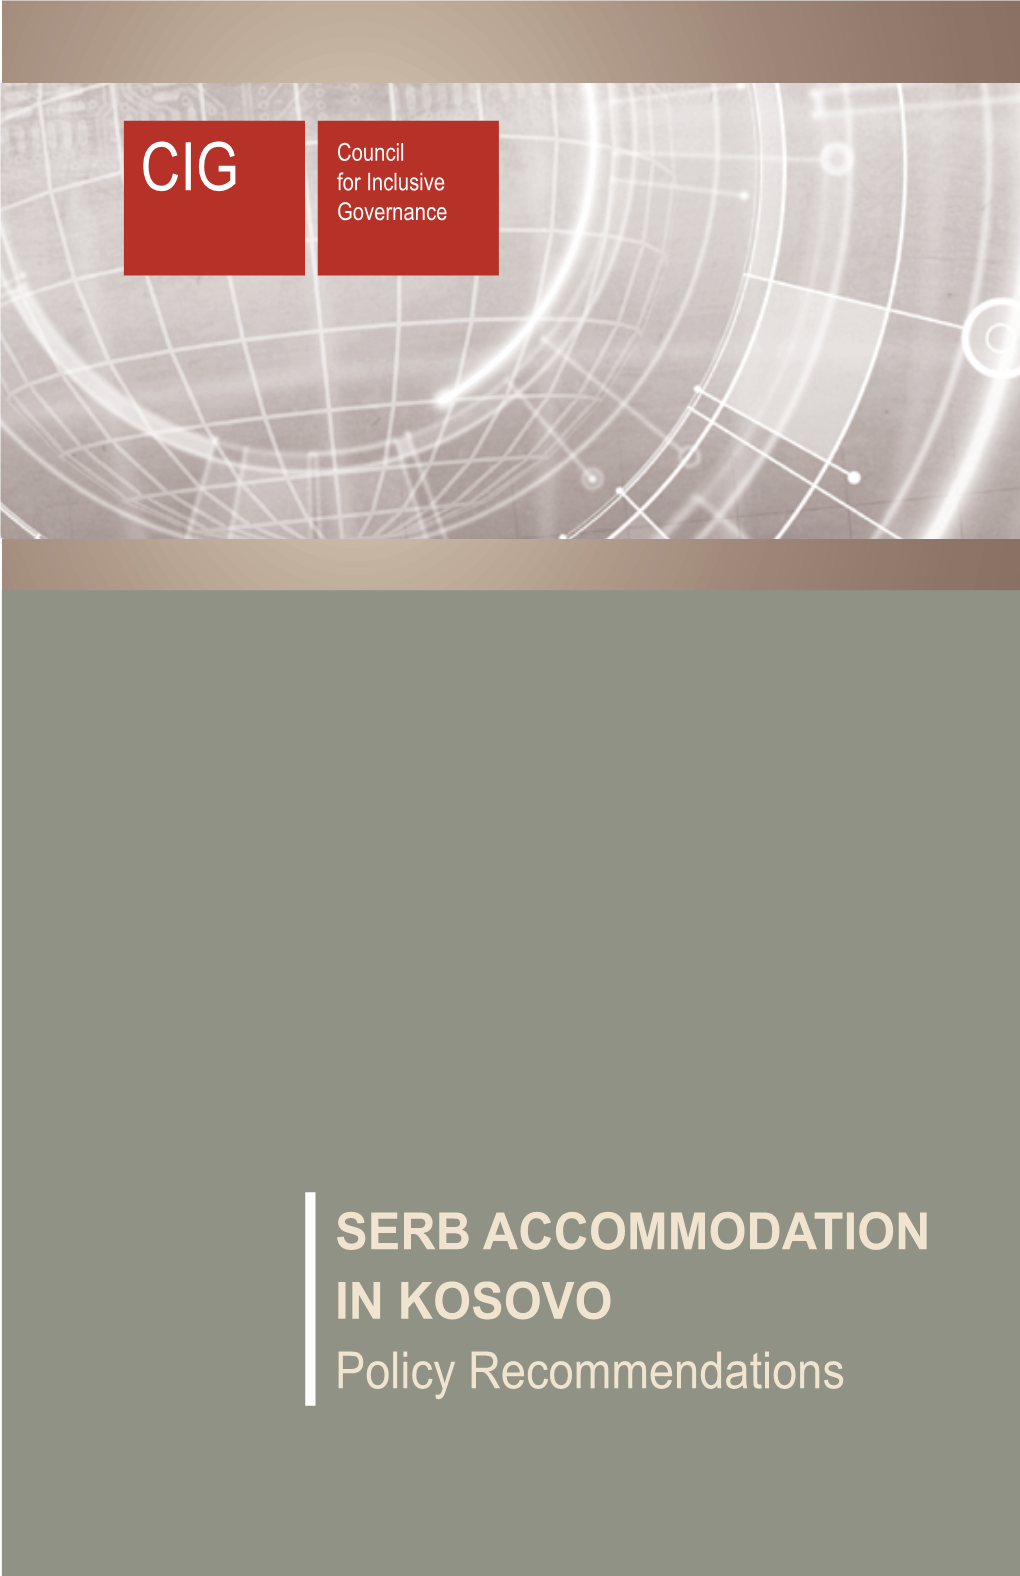 SERB ACCOMMODATION in KOSOVO Policy Recommendations Contents